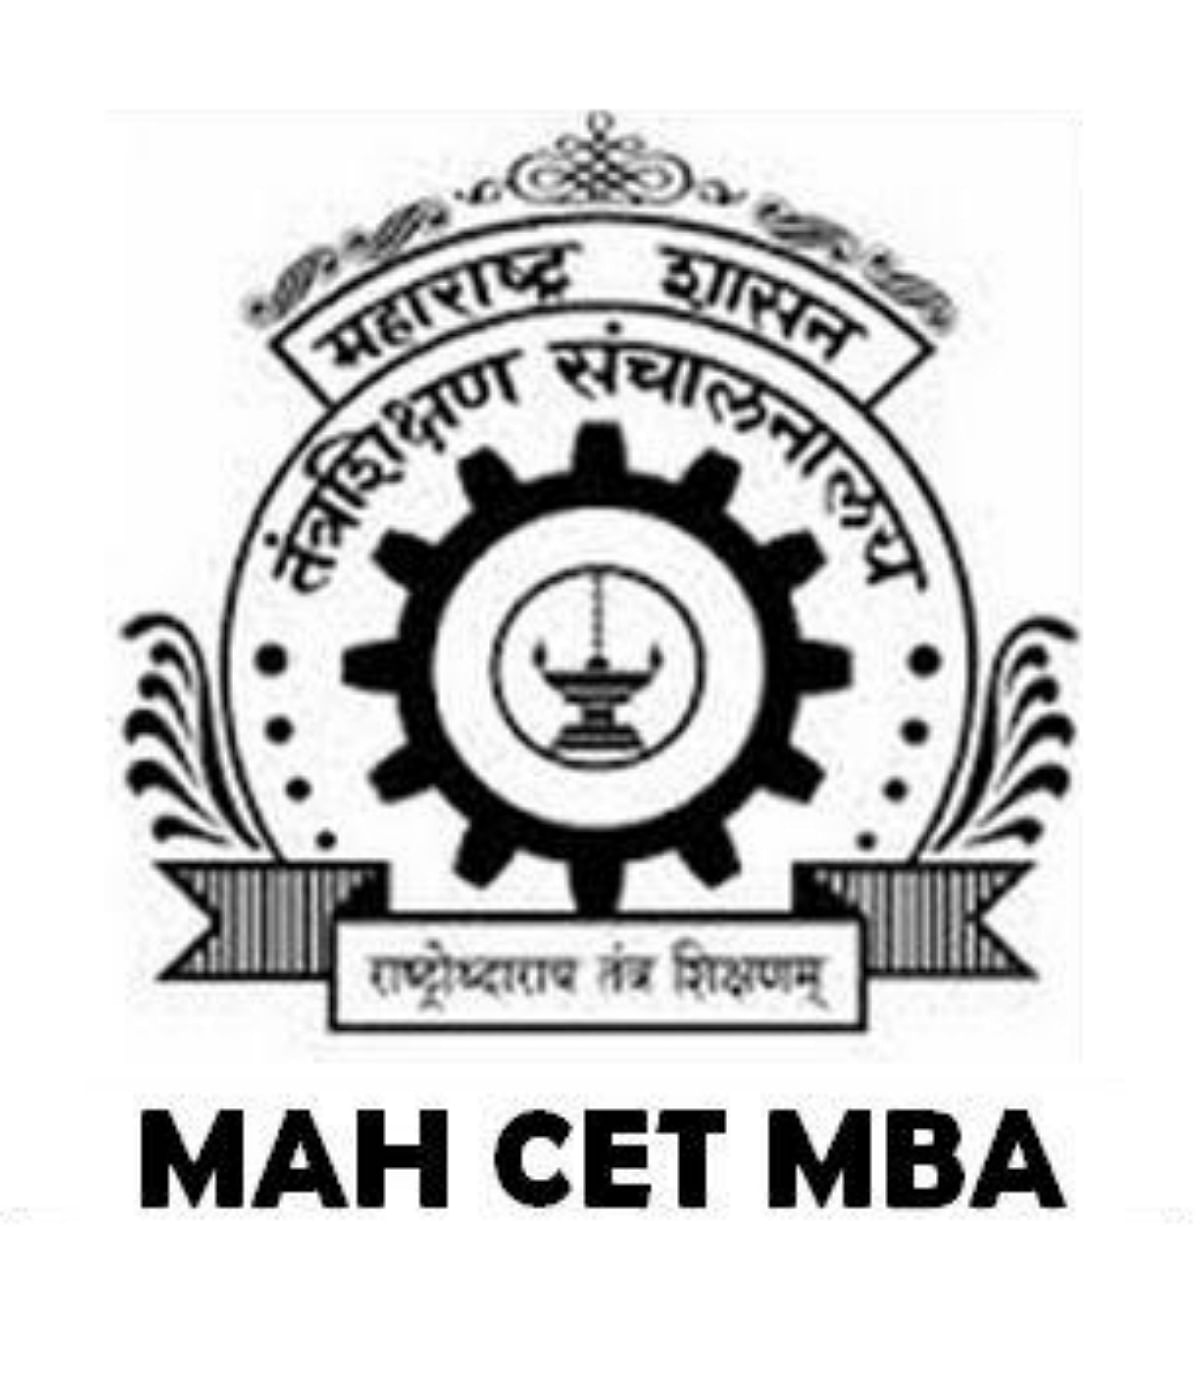 COVID 19 Outbreak: Maharastra MBA CET 2020 Result Postponed, Latest Updates Here